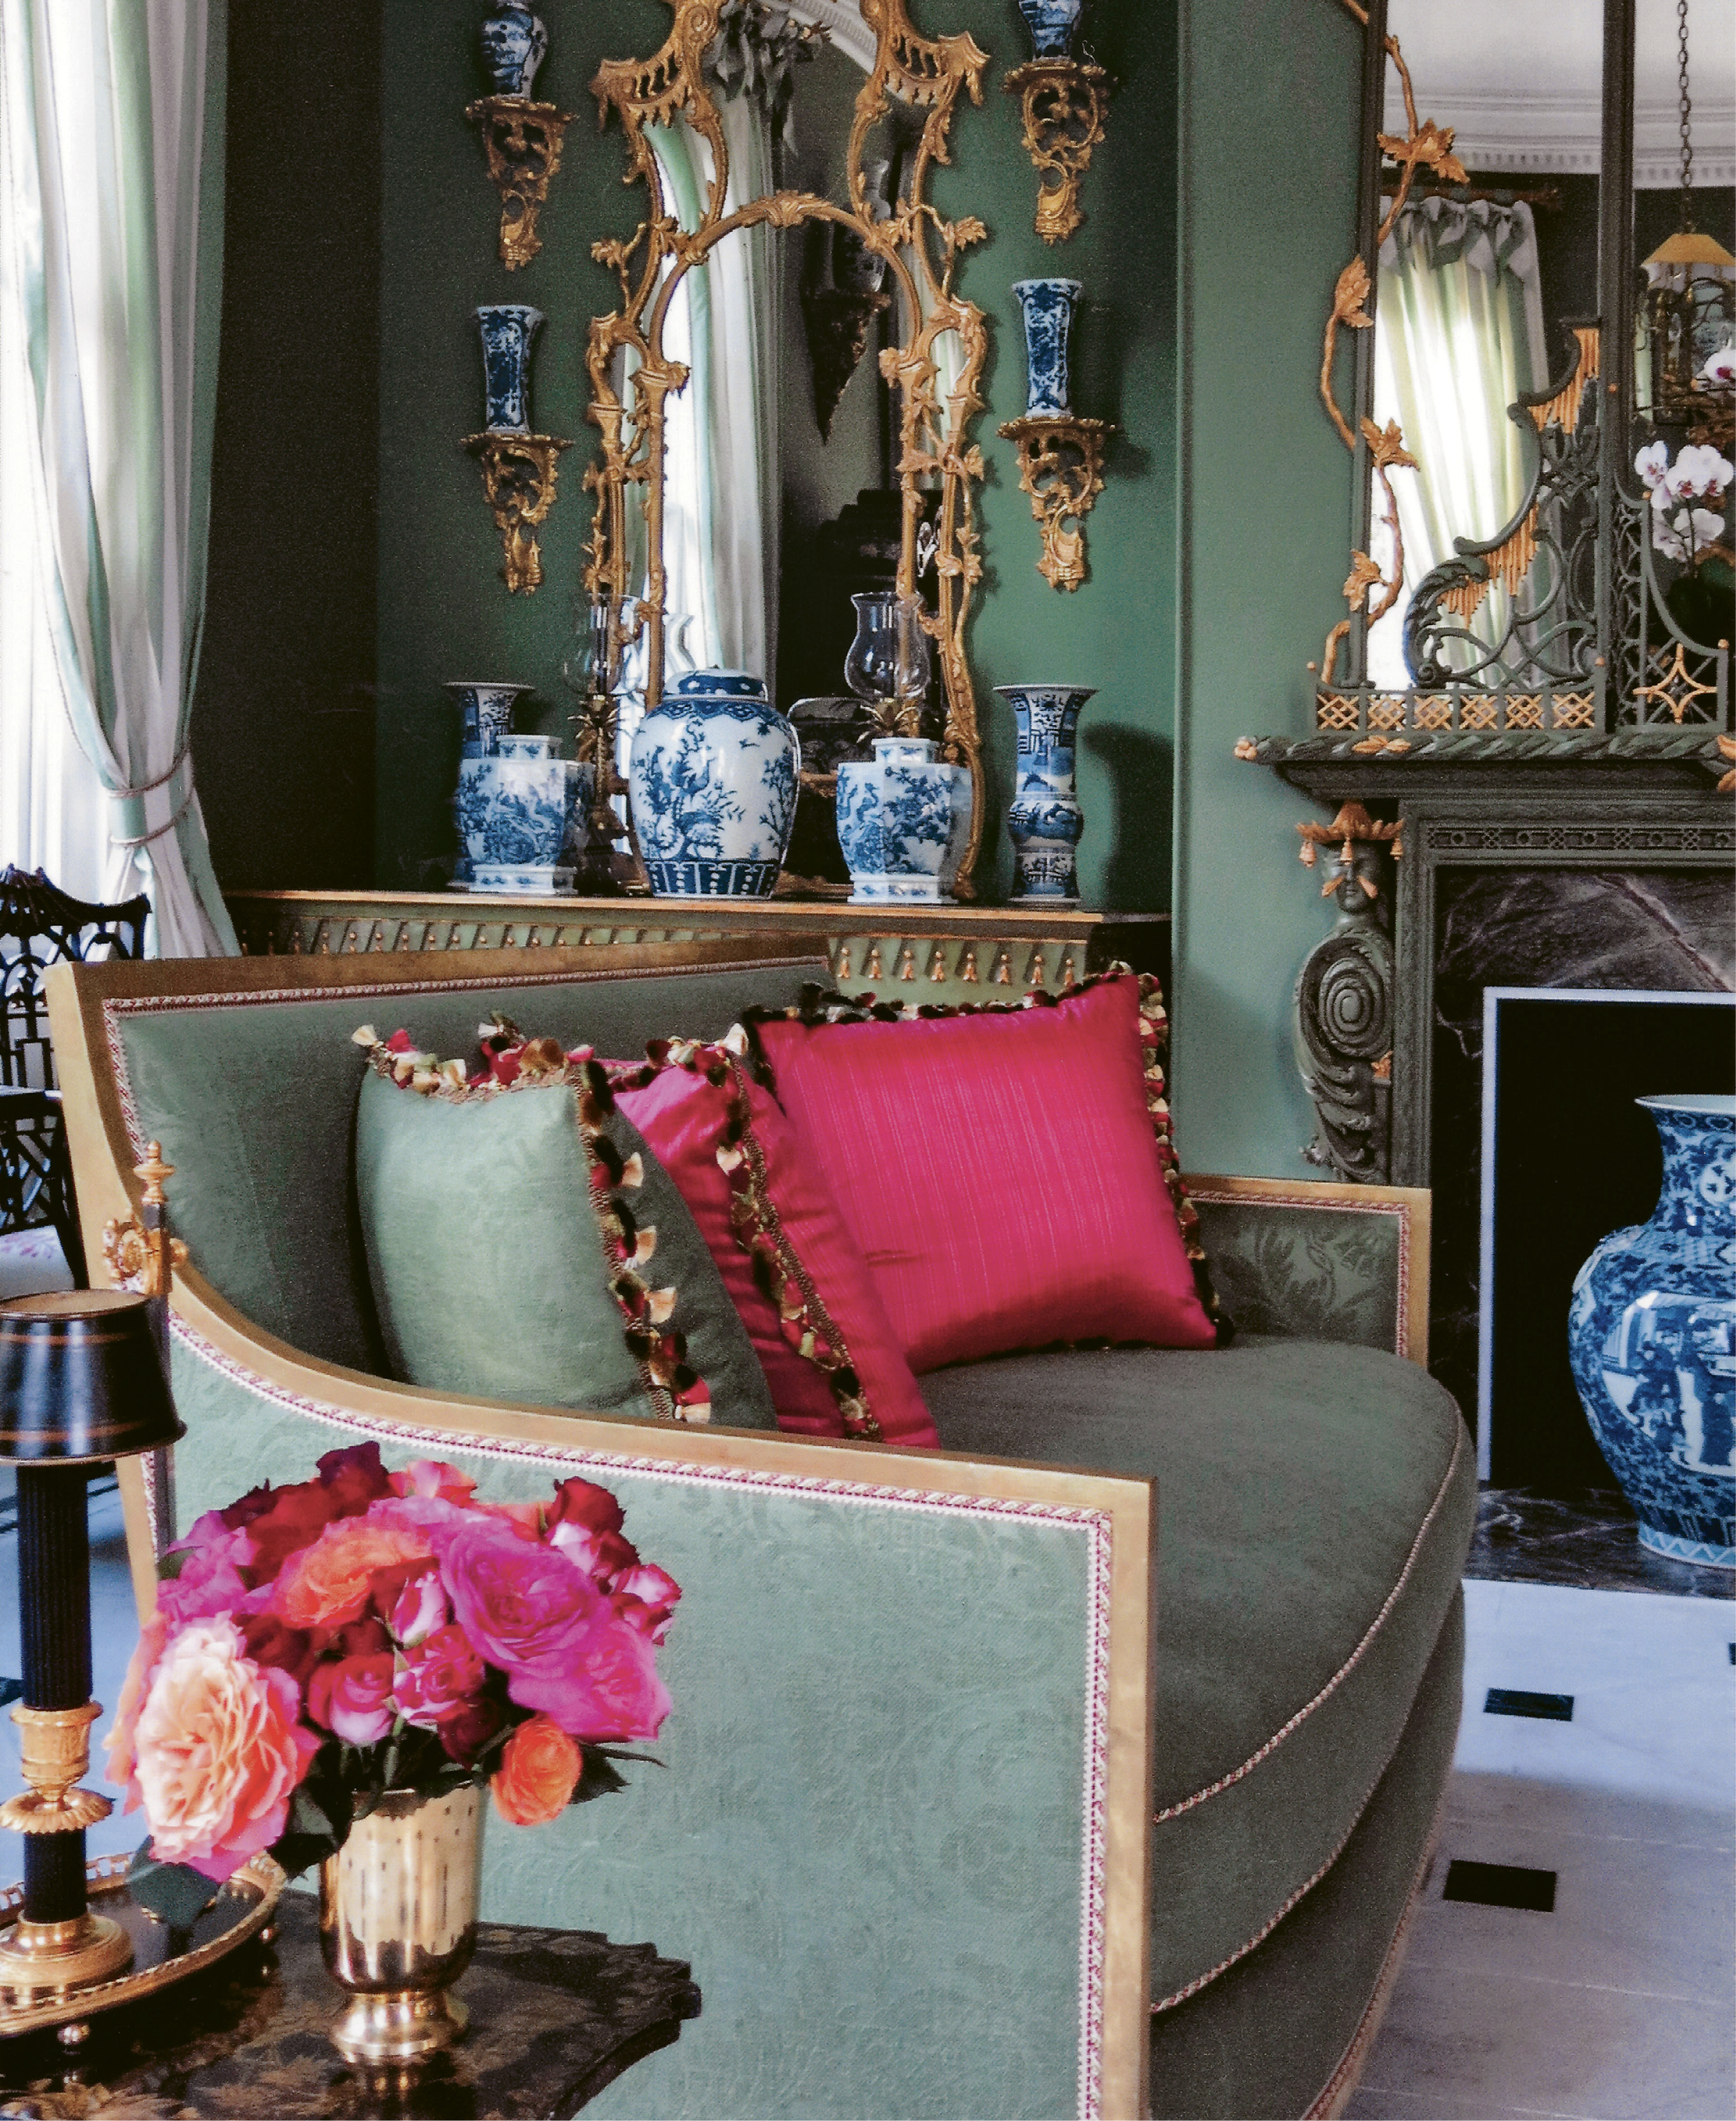 Living In Color: Her living room is an ornate ode to texture, color, and craftsmanship and a showcase for her love of chinoiserie, including lacquerwork, carved and gilded wood, and blue-and-white porcelain.